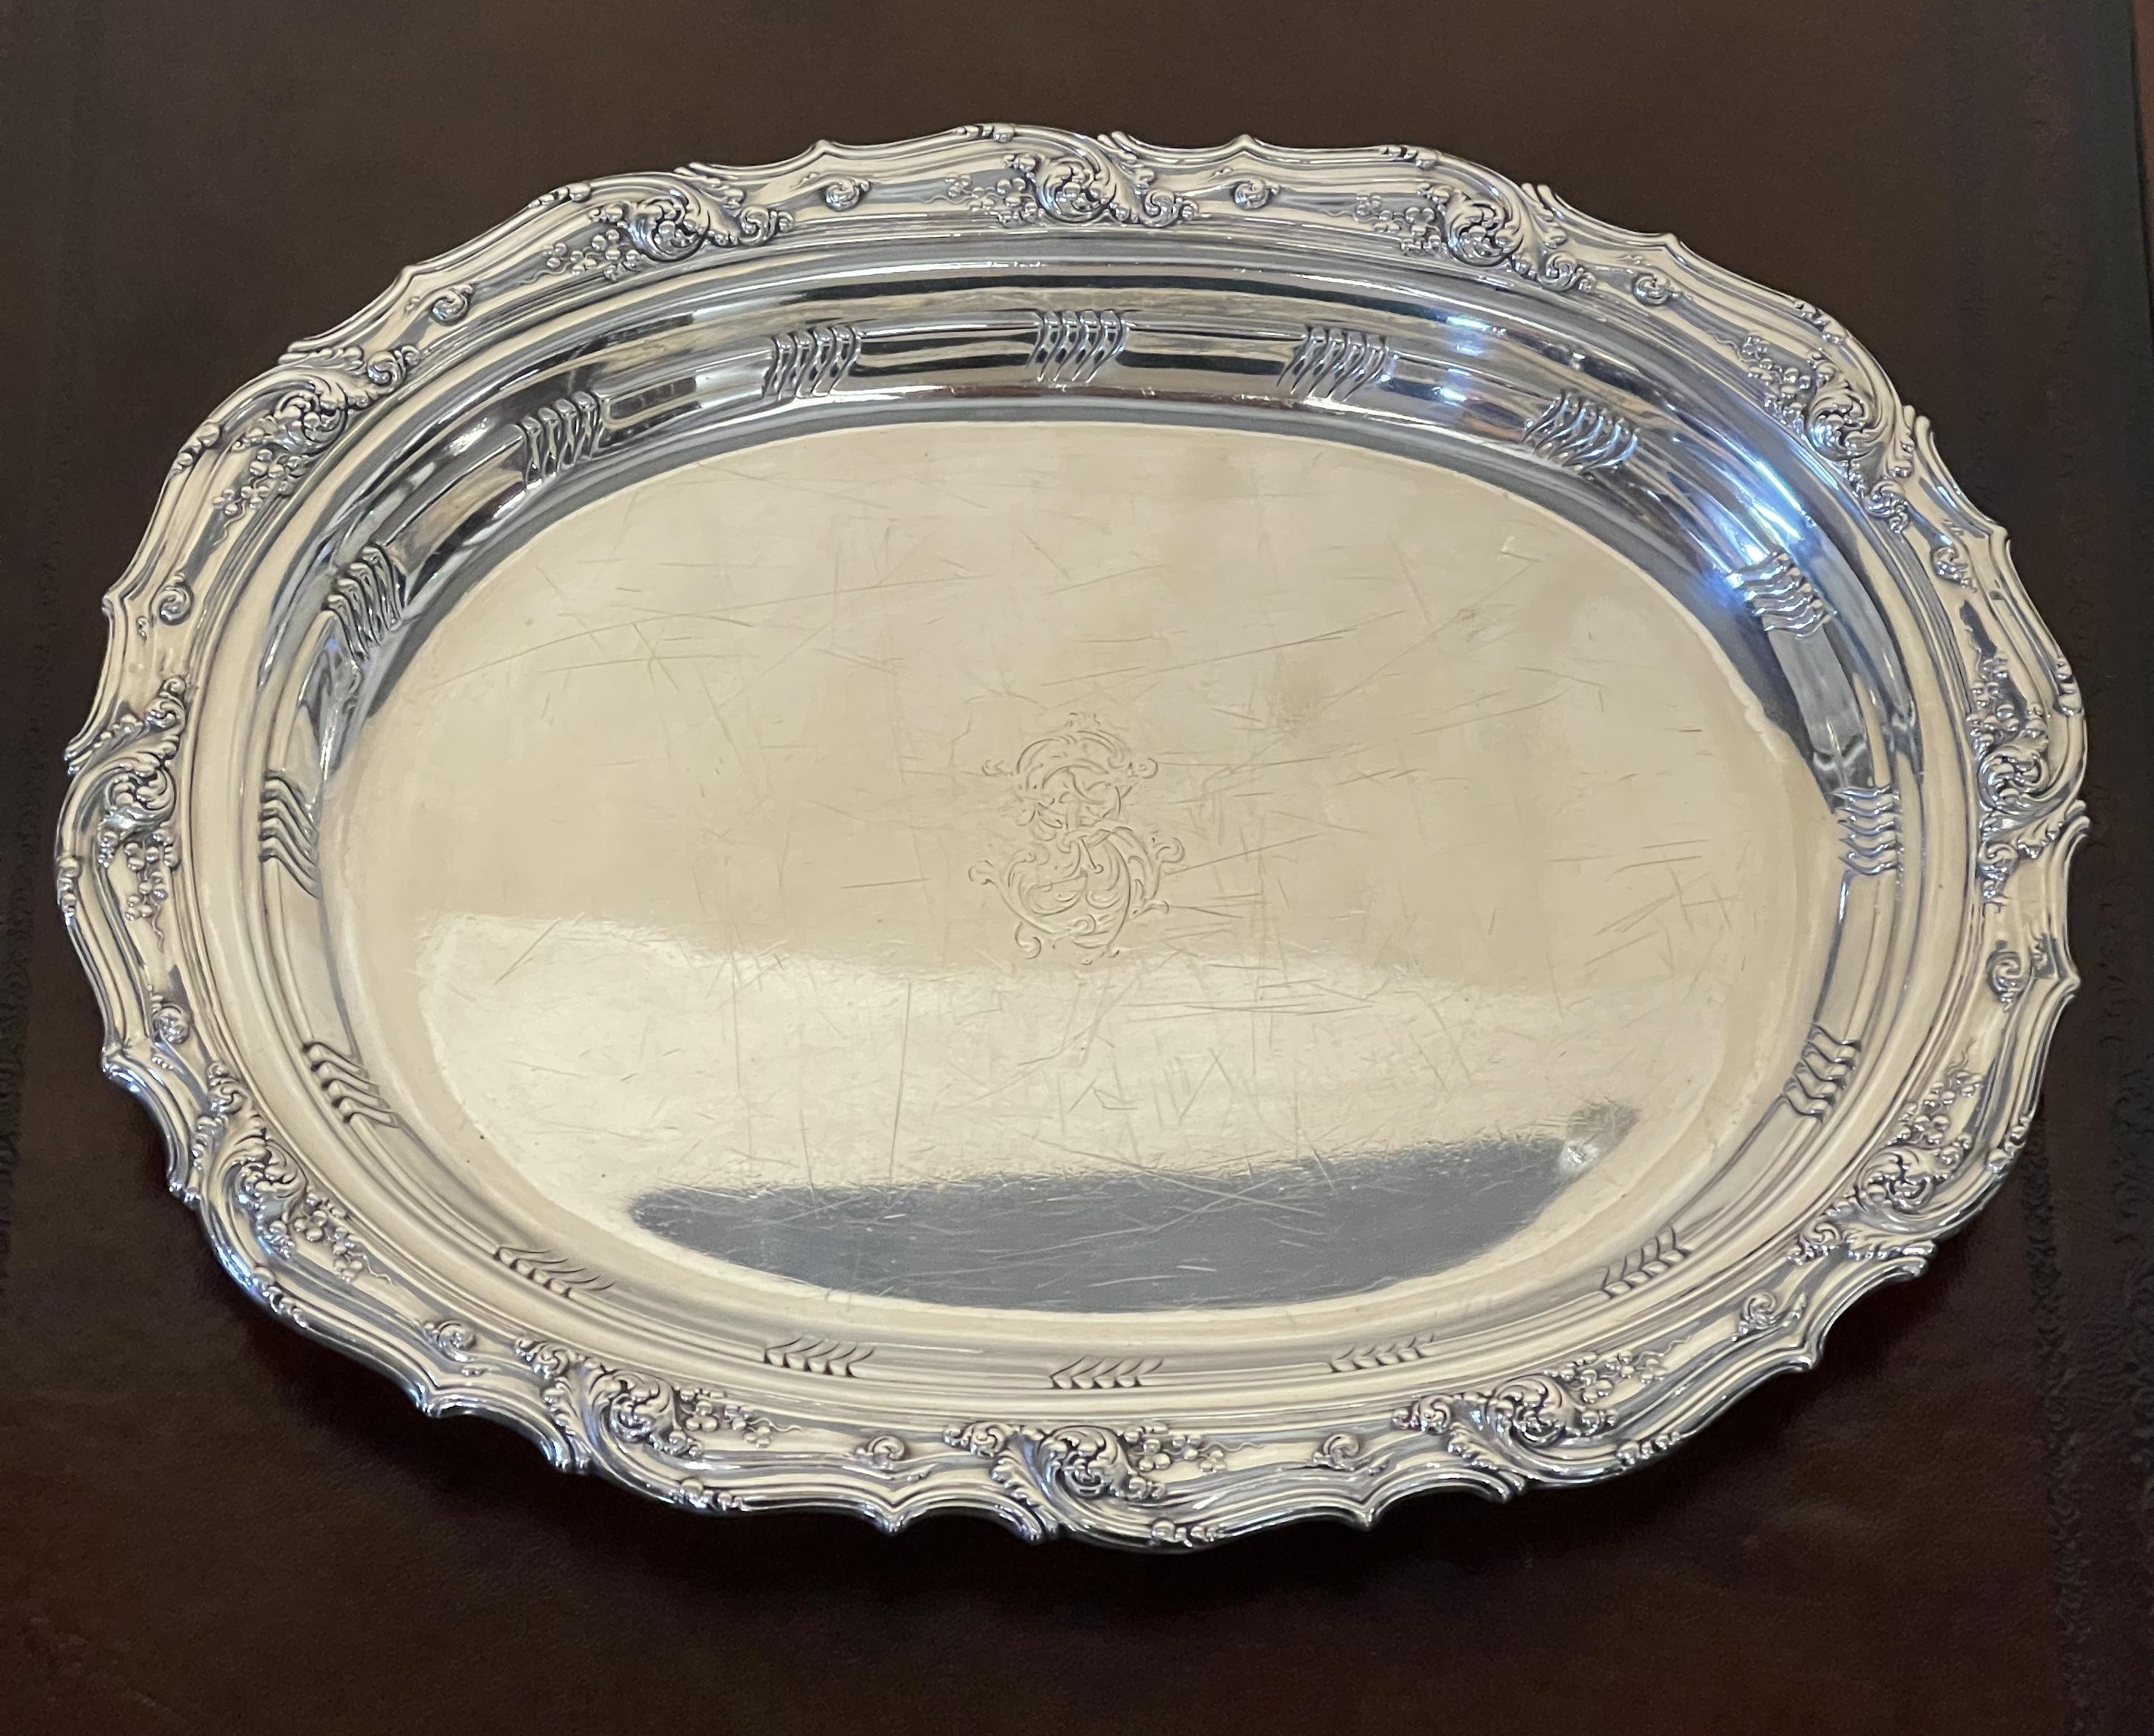 Super COLLECTable WORLD FAiR CHICAGO 1893 ANTIQUE TIFFANY & CO STERLING TRAY im Angebot 2